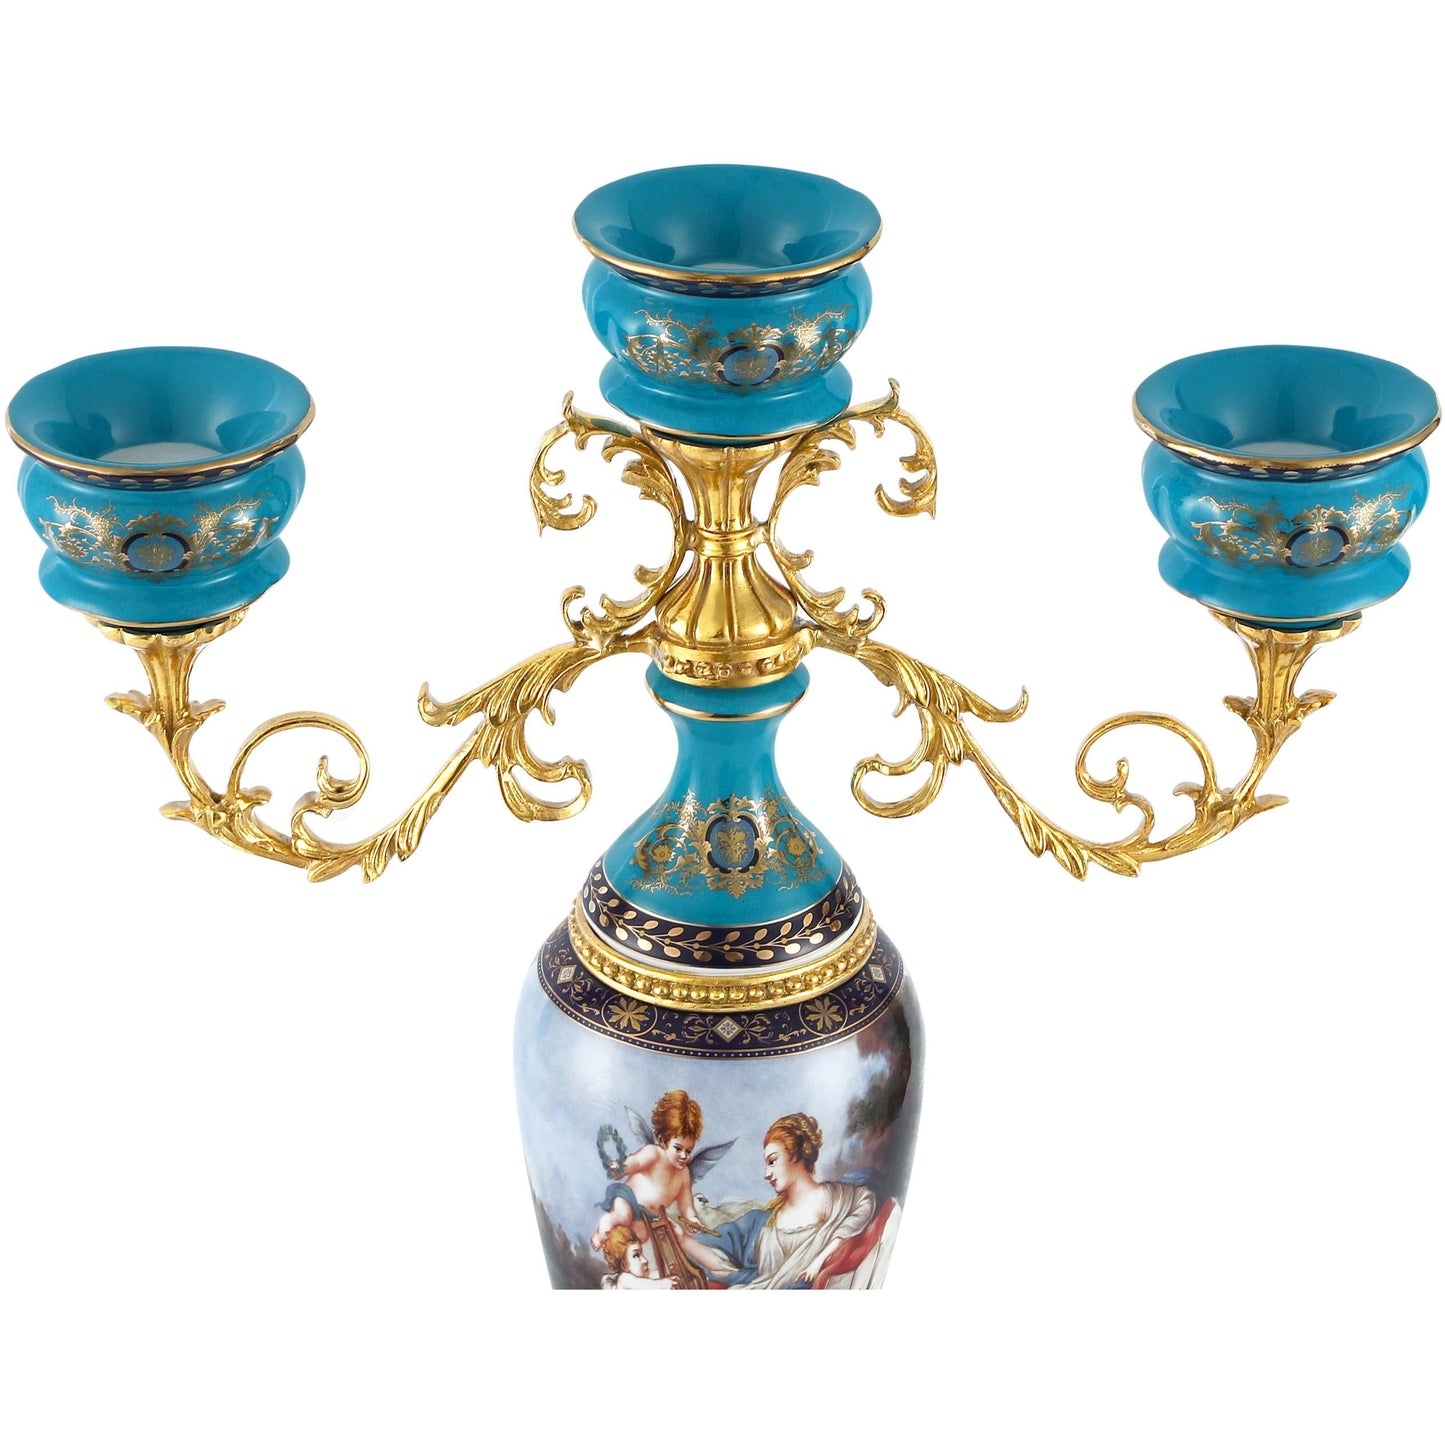 DECOELEVEN ™ Porcelain and Bronze Three Cup Candle Holder